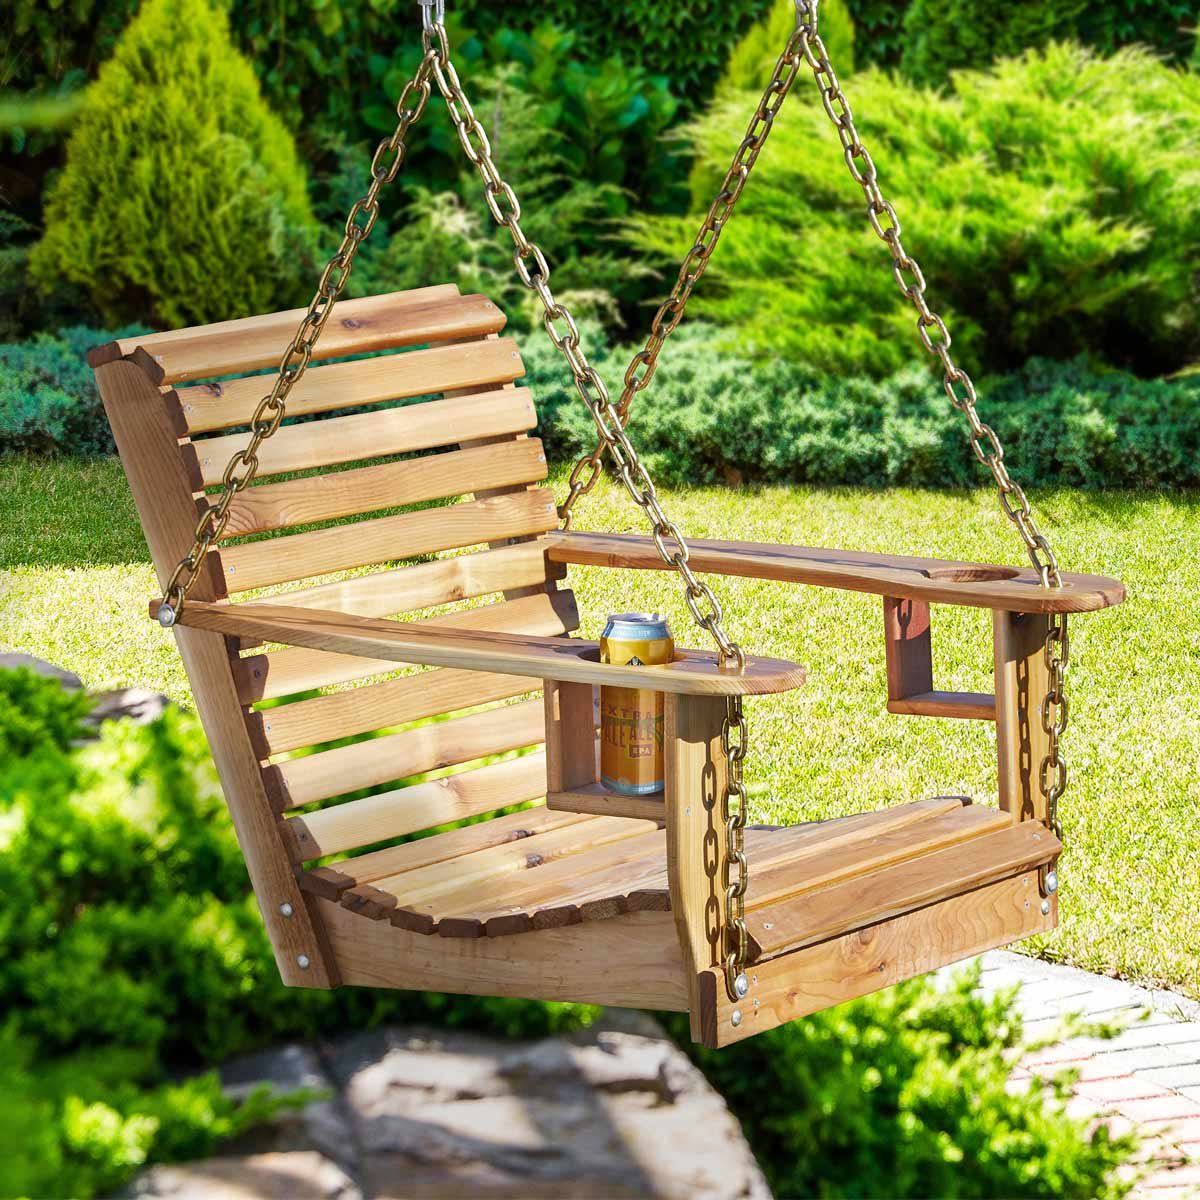 How to Build a Backyard Swing | DIY Done Right